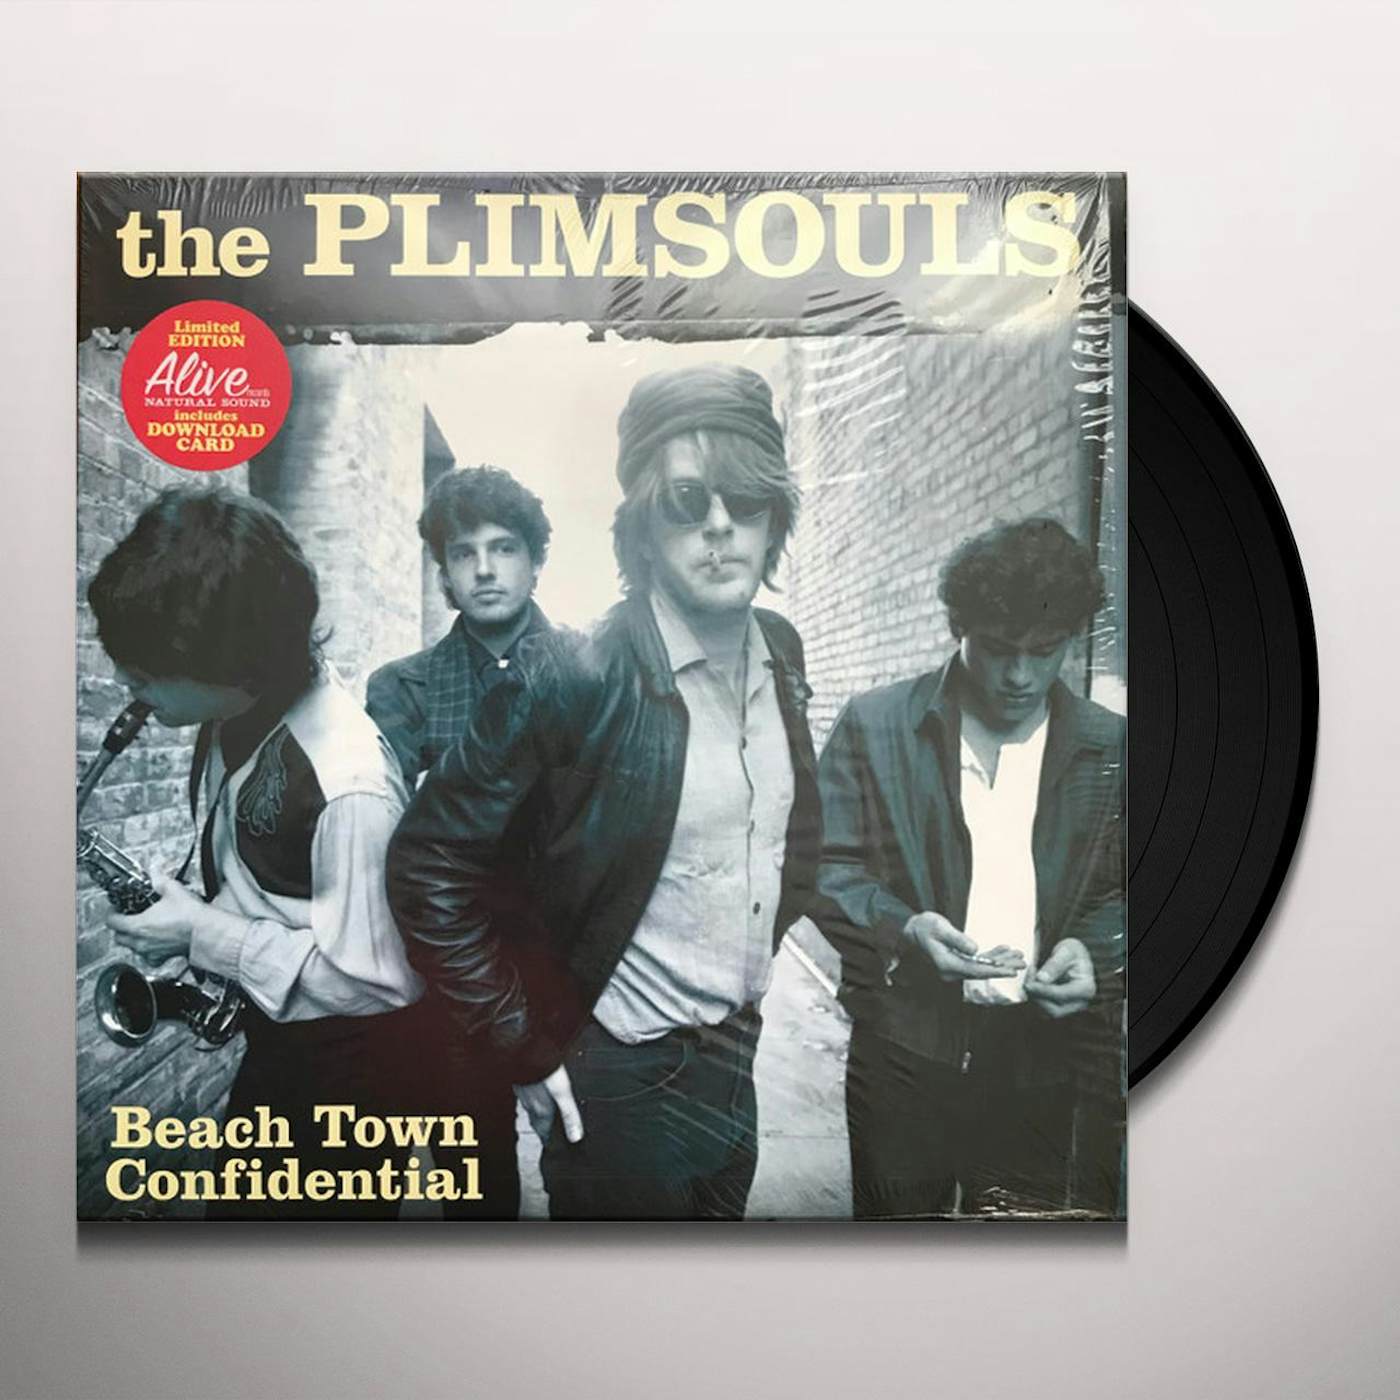 Plimsouls BEACH TOWN CONFIDENTIAL: LIVE AT THE GOLDEN BEAR 1983 Vinyl Record